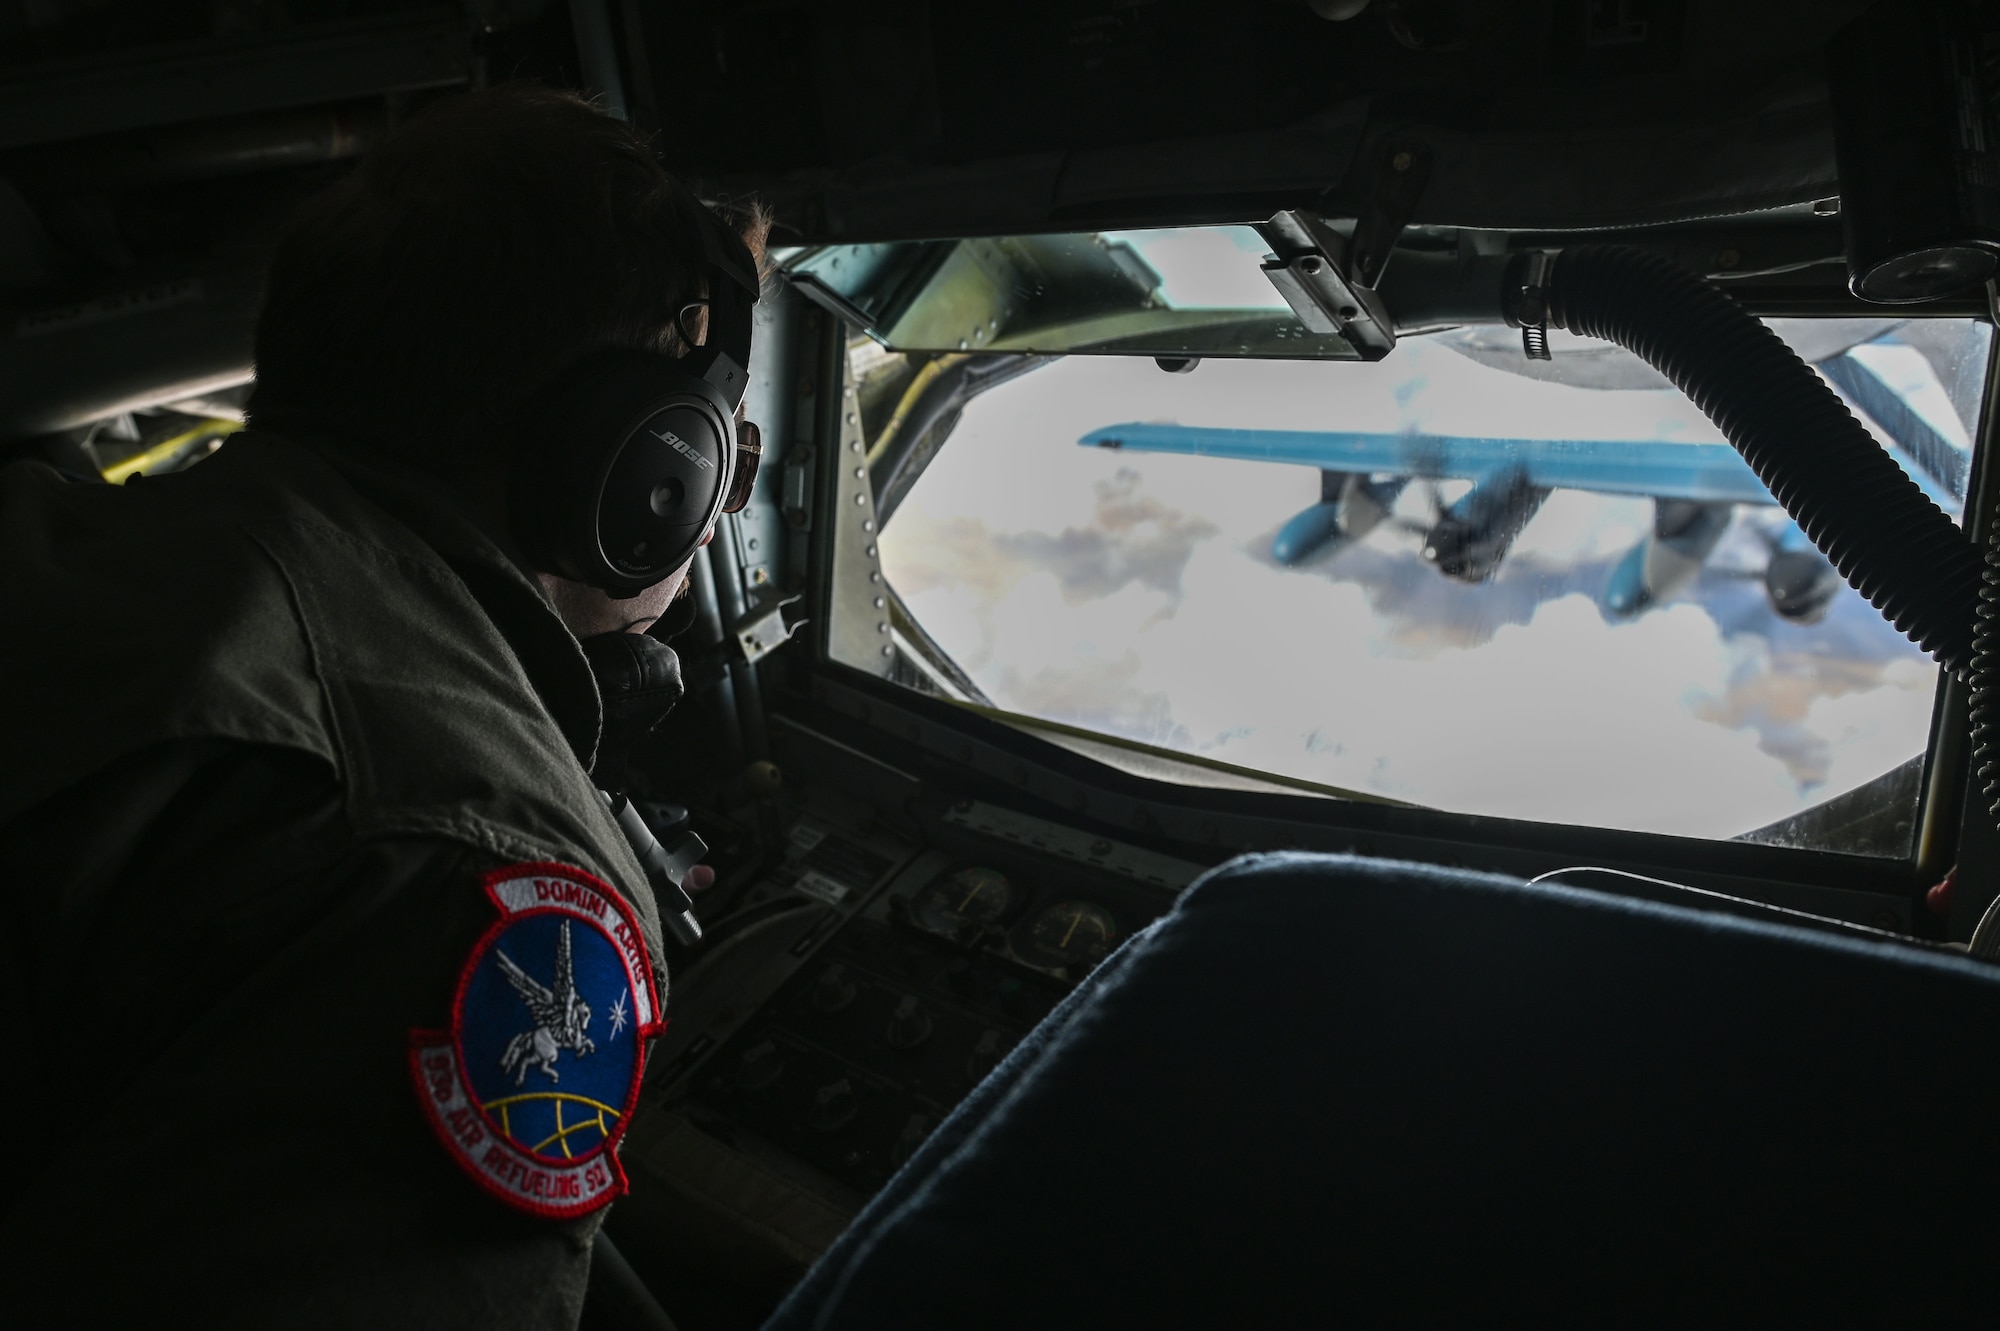 U.S. Air Force Airman 1st Class David Trulson, 93rd Air Refueling Squadron inflight refueling specialist, refuels a HC-130J Hercules during an aircrew endurance flight exercise at Roswell, New Mexico, Feb. 17, 2023. This exercise is an example of how the 92nd Air Refueling Wing is engaged, postured, and ready with credible force to assure, deter, and defend in an increasingly complex security environment. (U.S. Air Force photo by Airman 1st Class Haiden Morris)